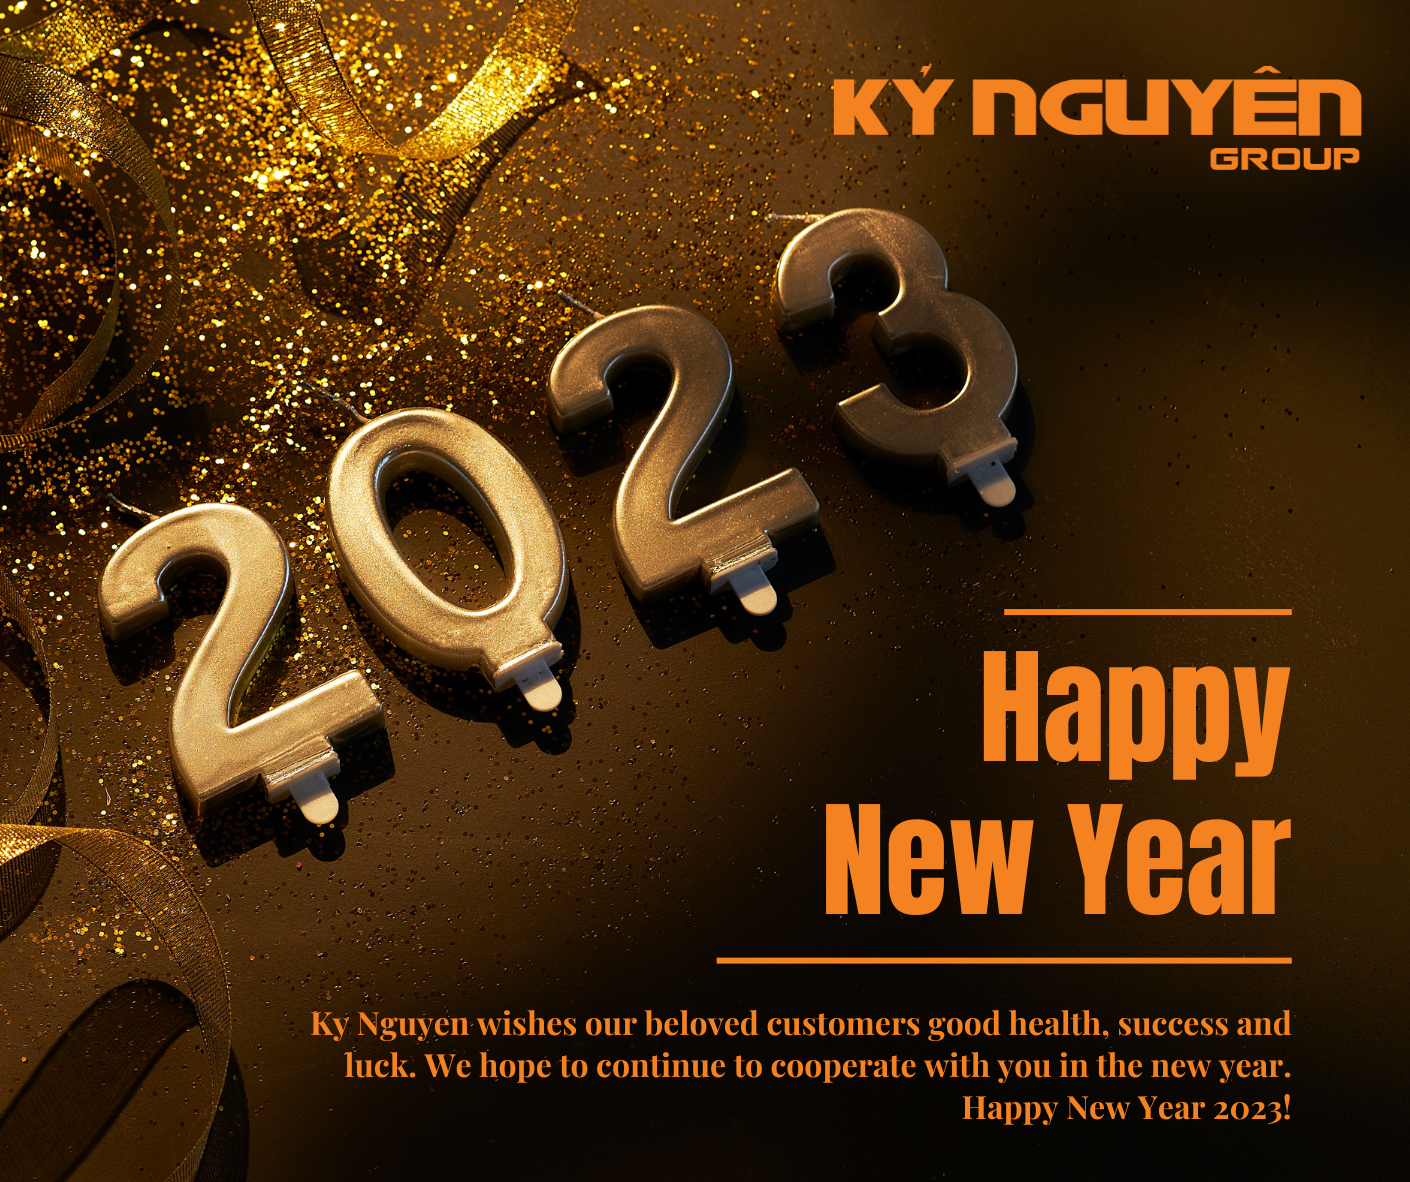 happy new year 2023, from ky nguyen group